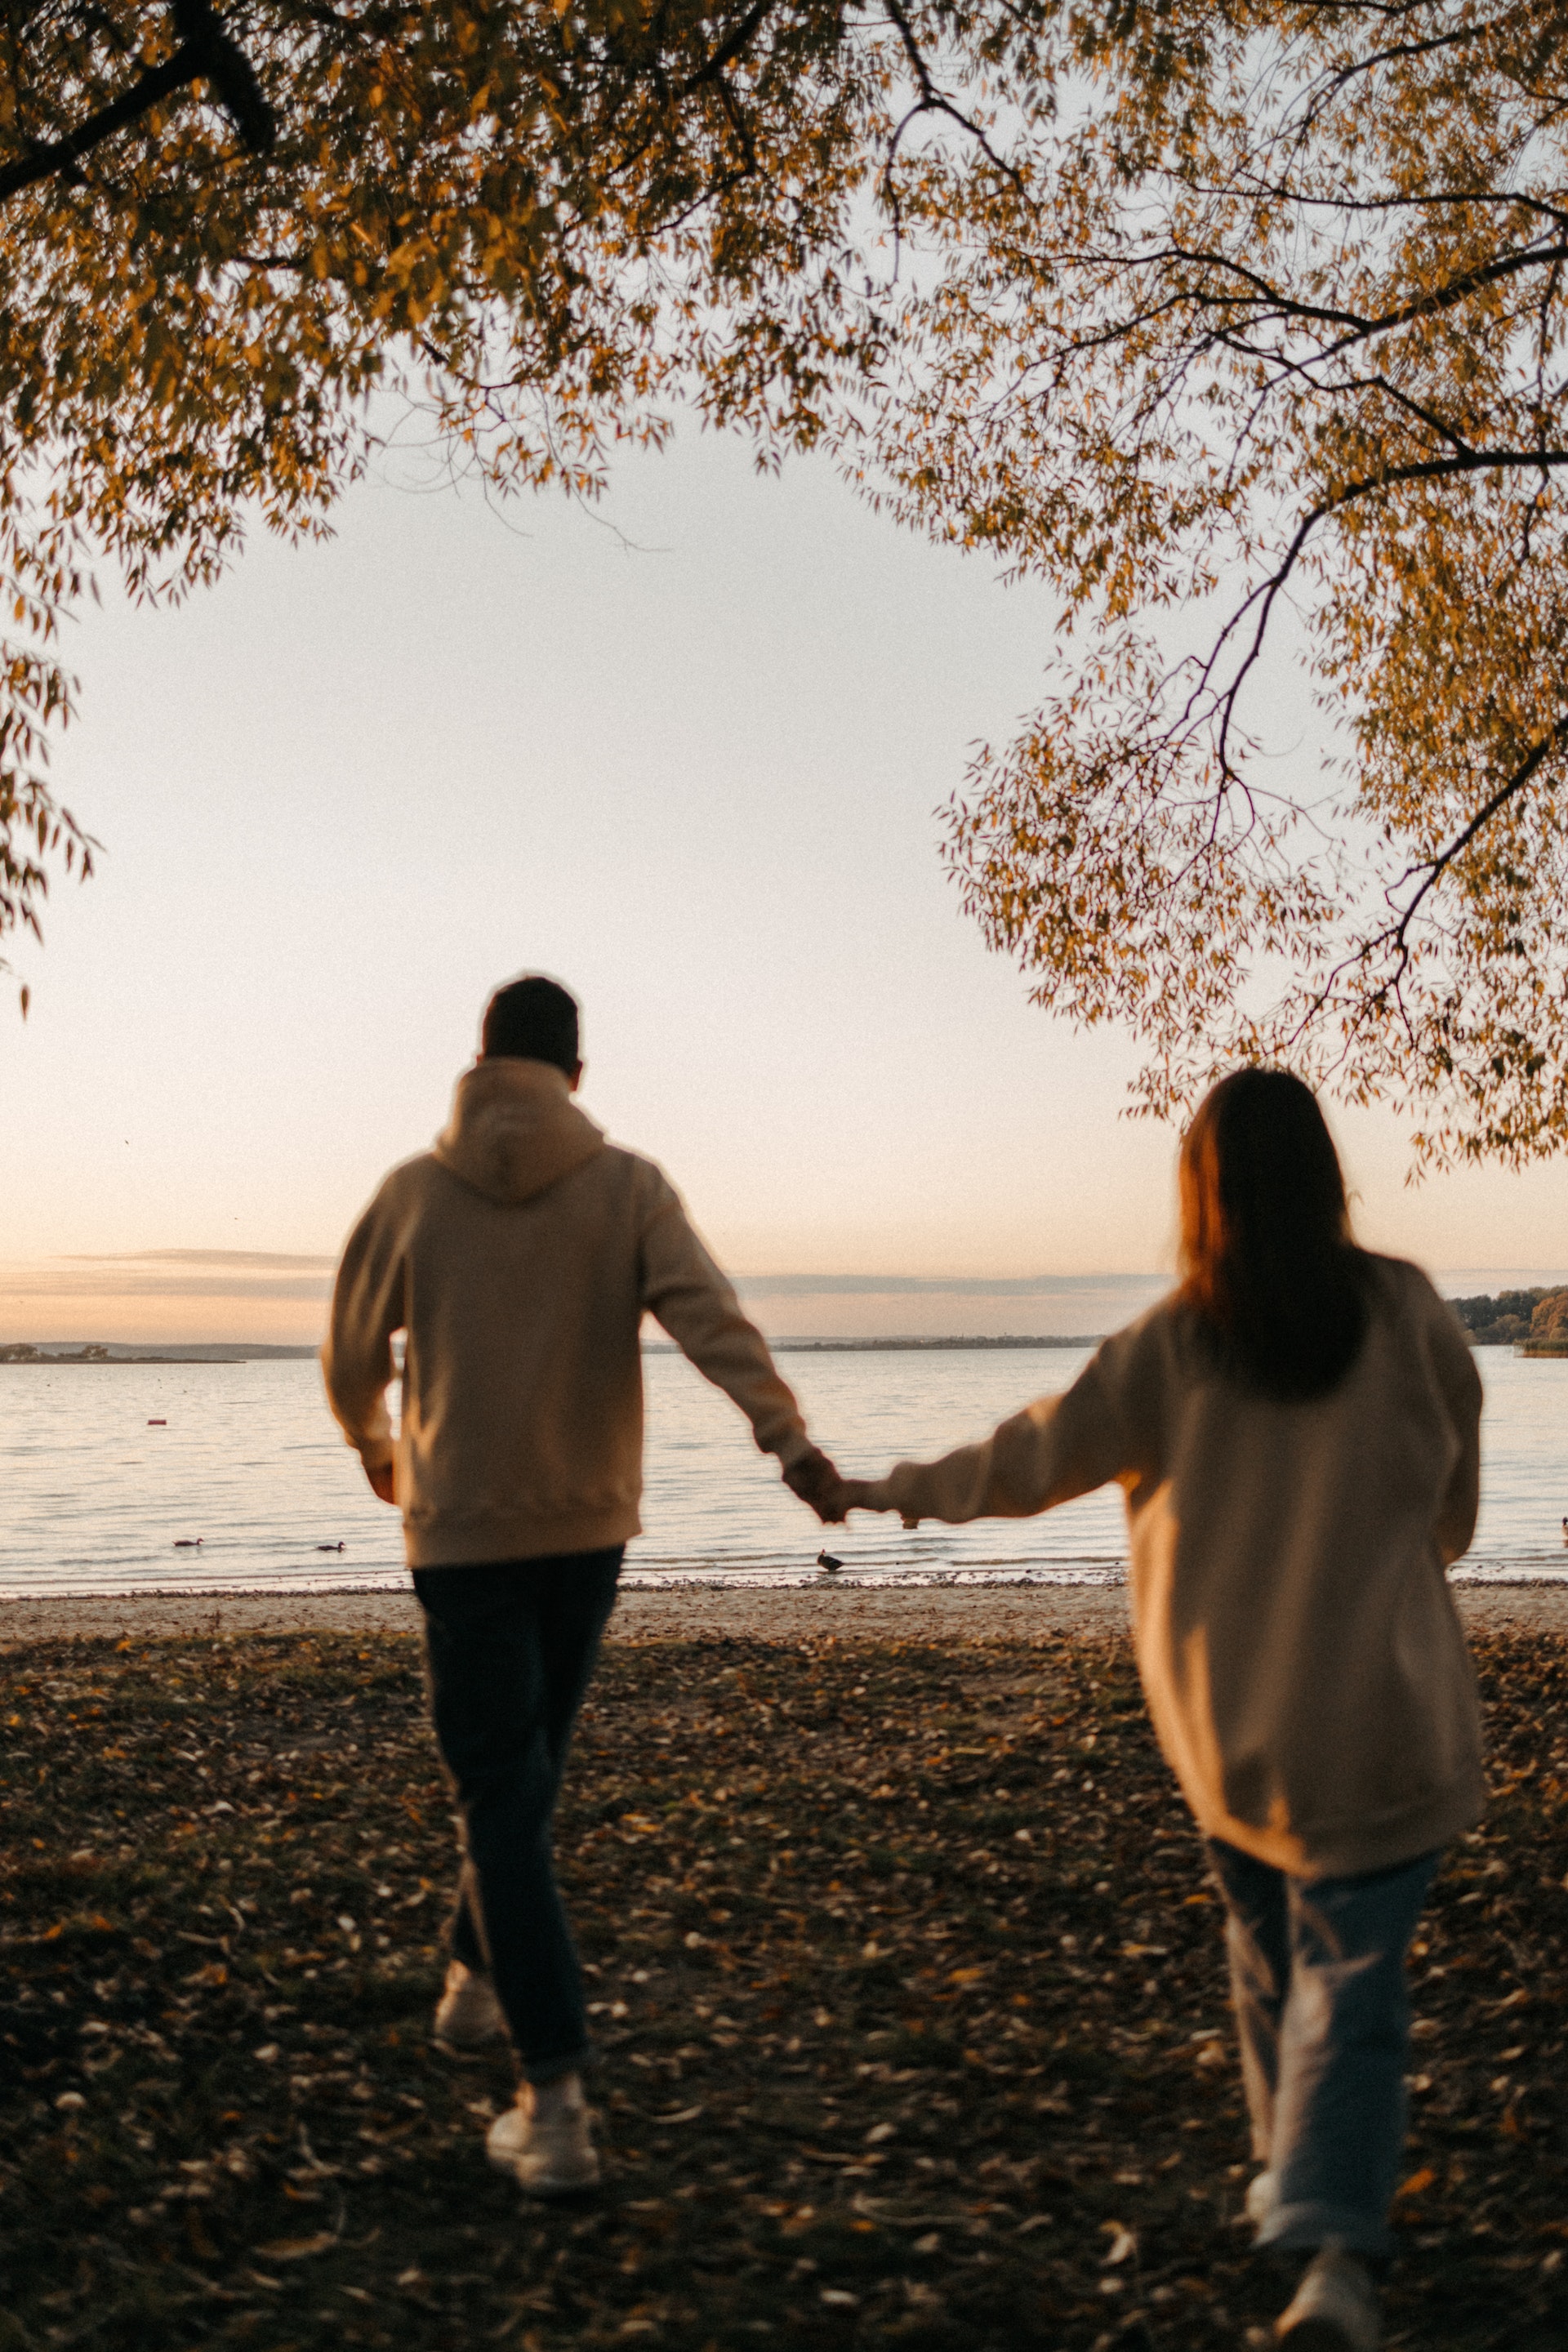 A couple walking on a beach | Source: Pexels